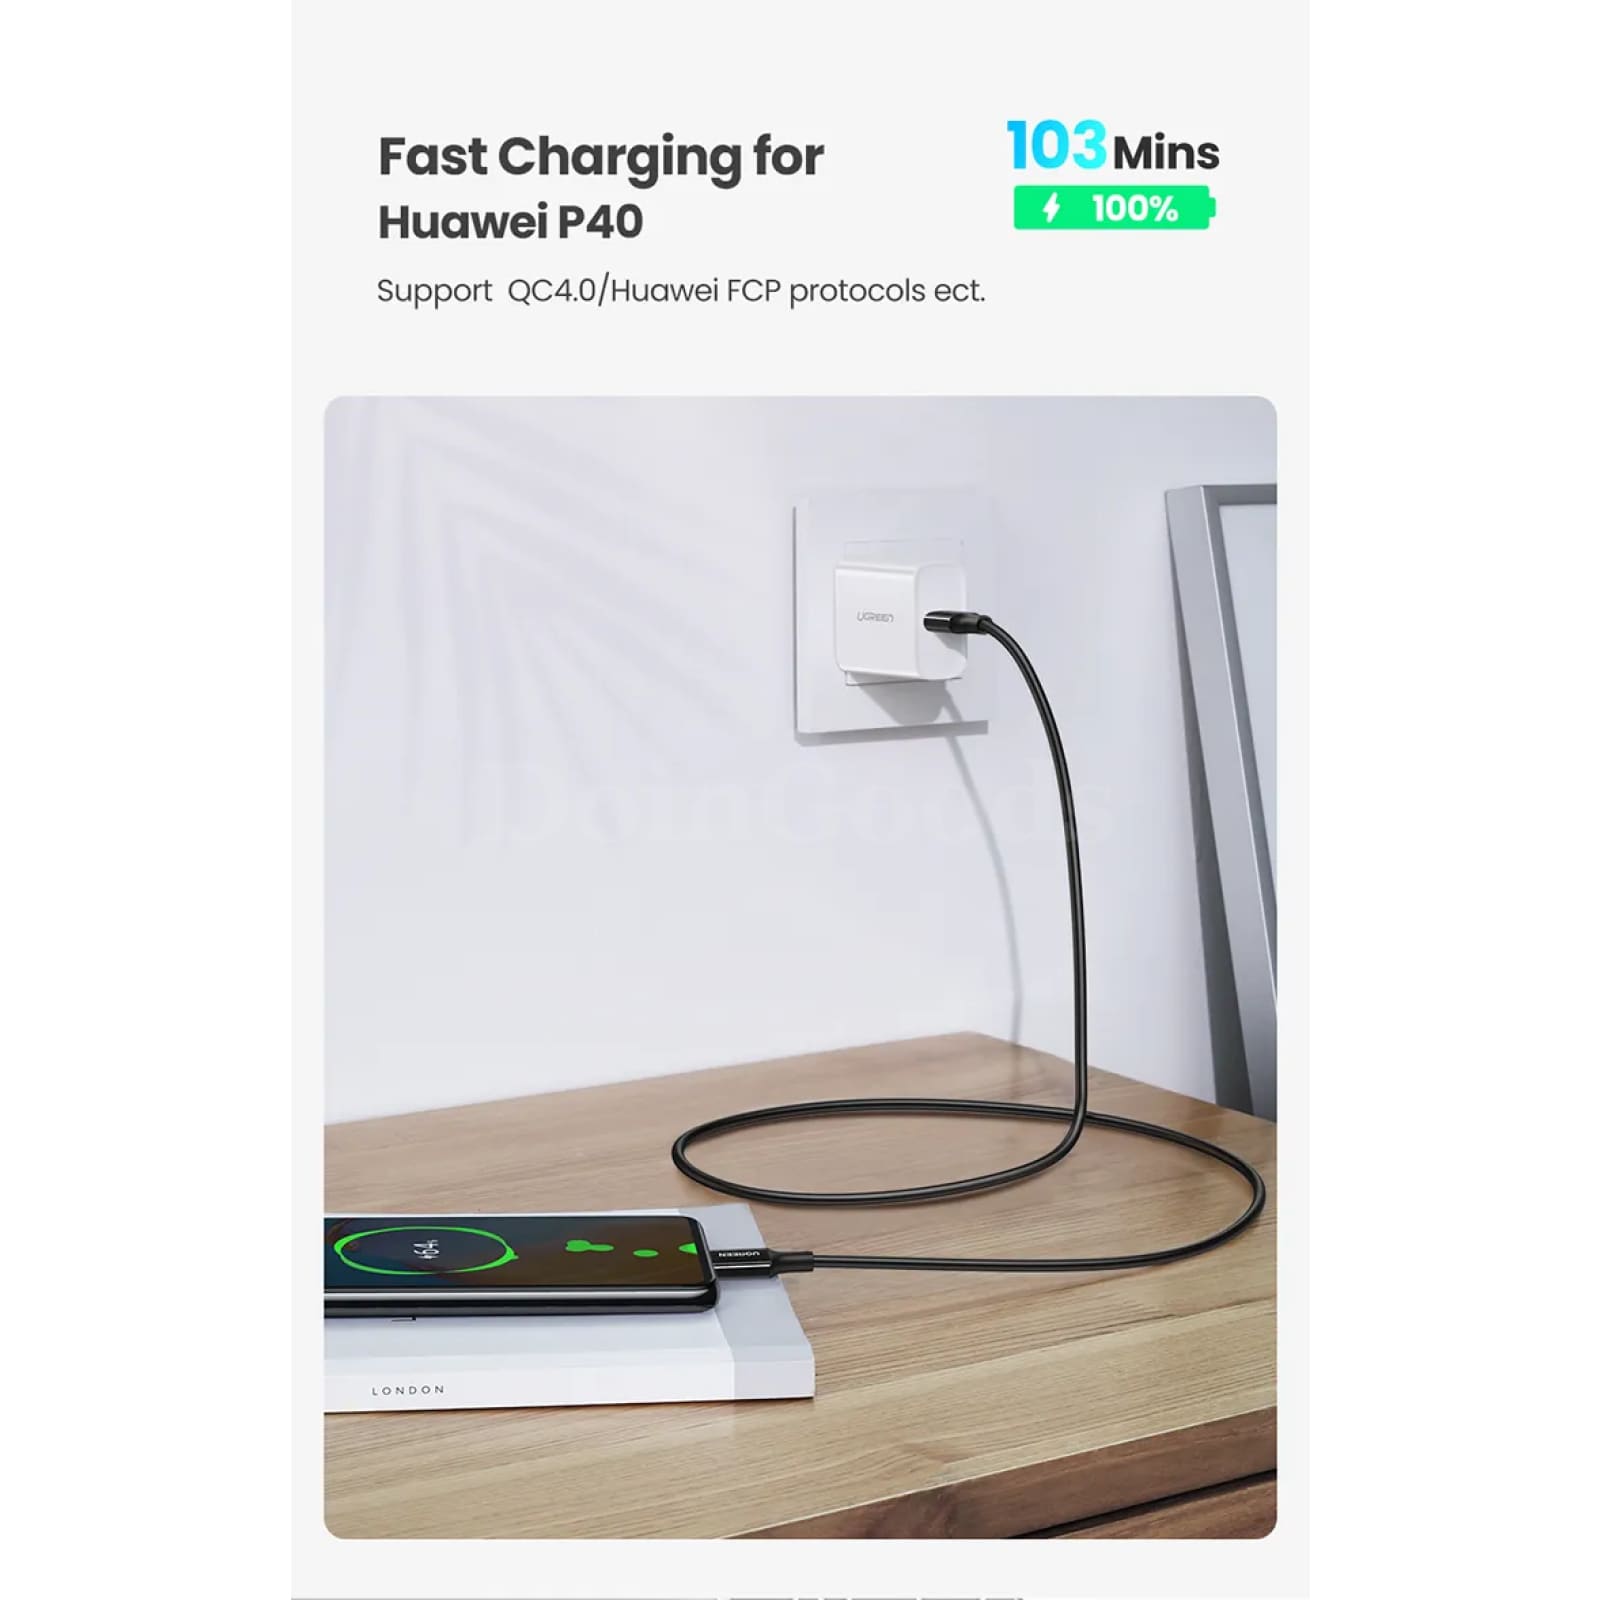 Ugreen 100W Usb Type C Cable Macbook Samsung Xiaomi 1.5M 5A E-Marker Chip Fast 301635